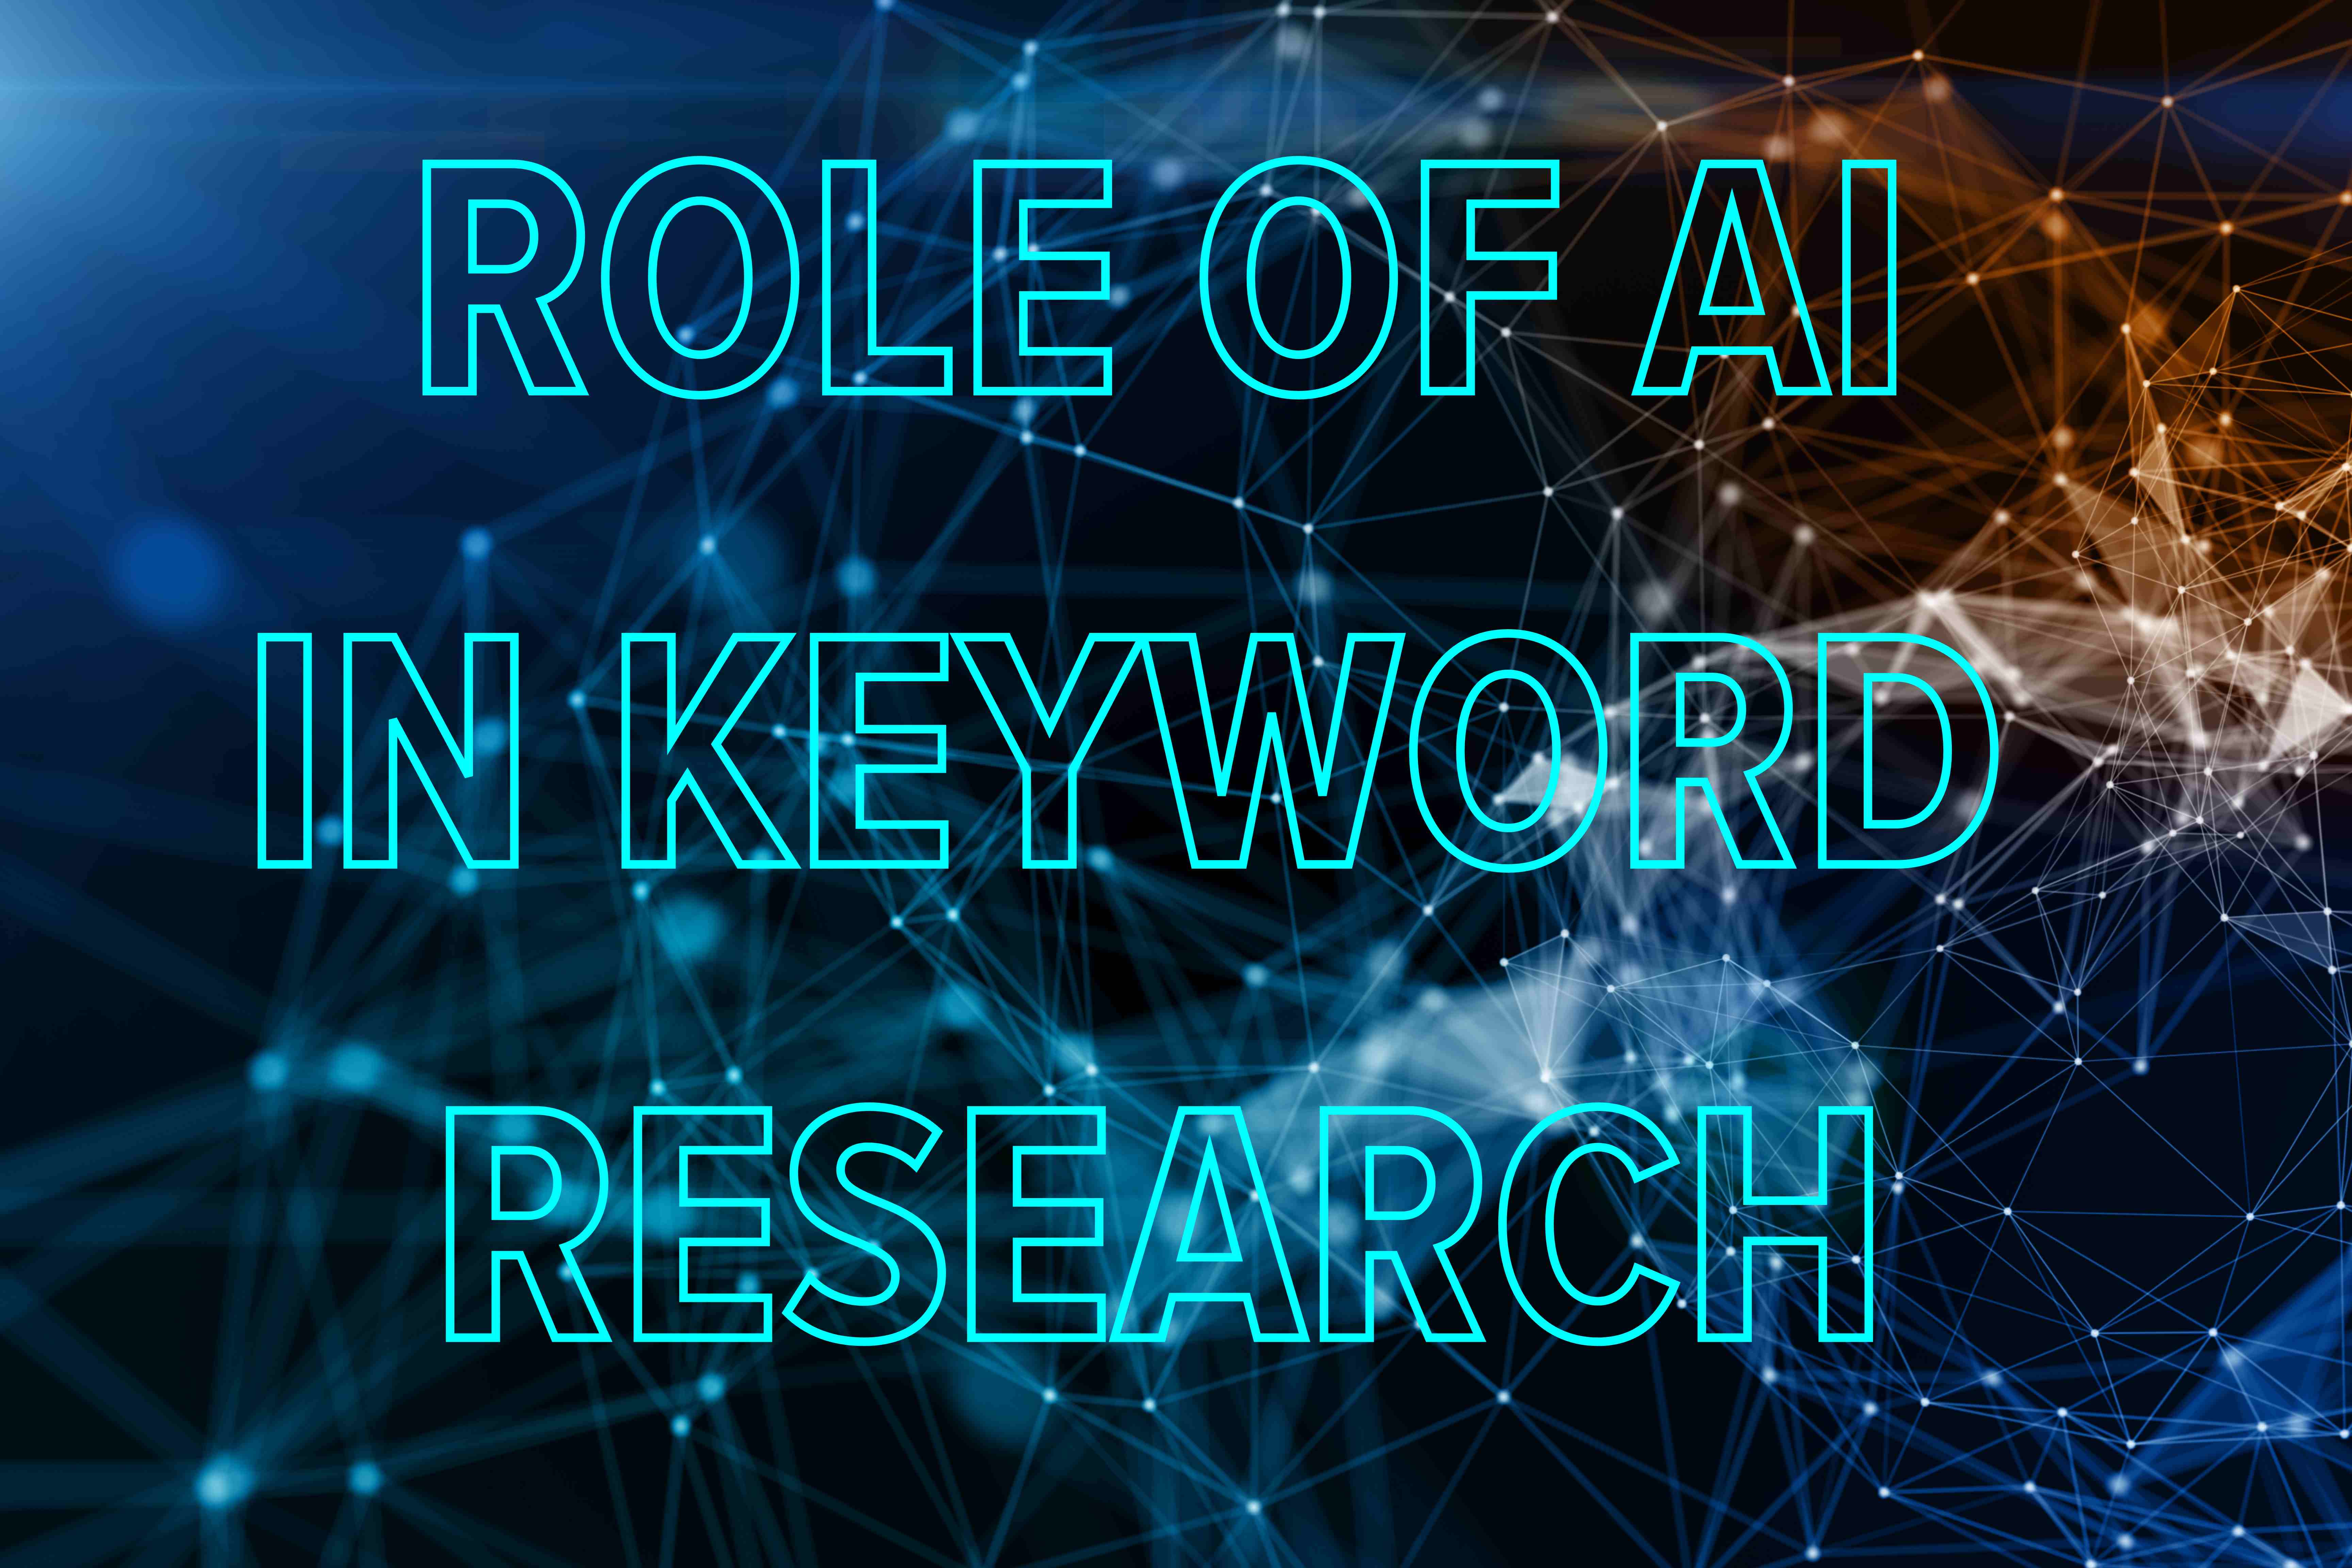 Role of AI in Keyword Research